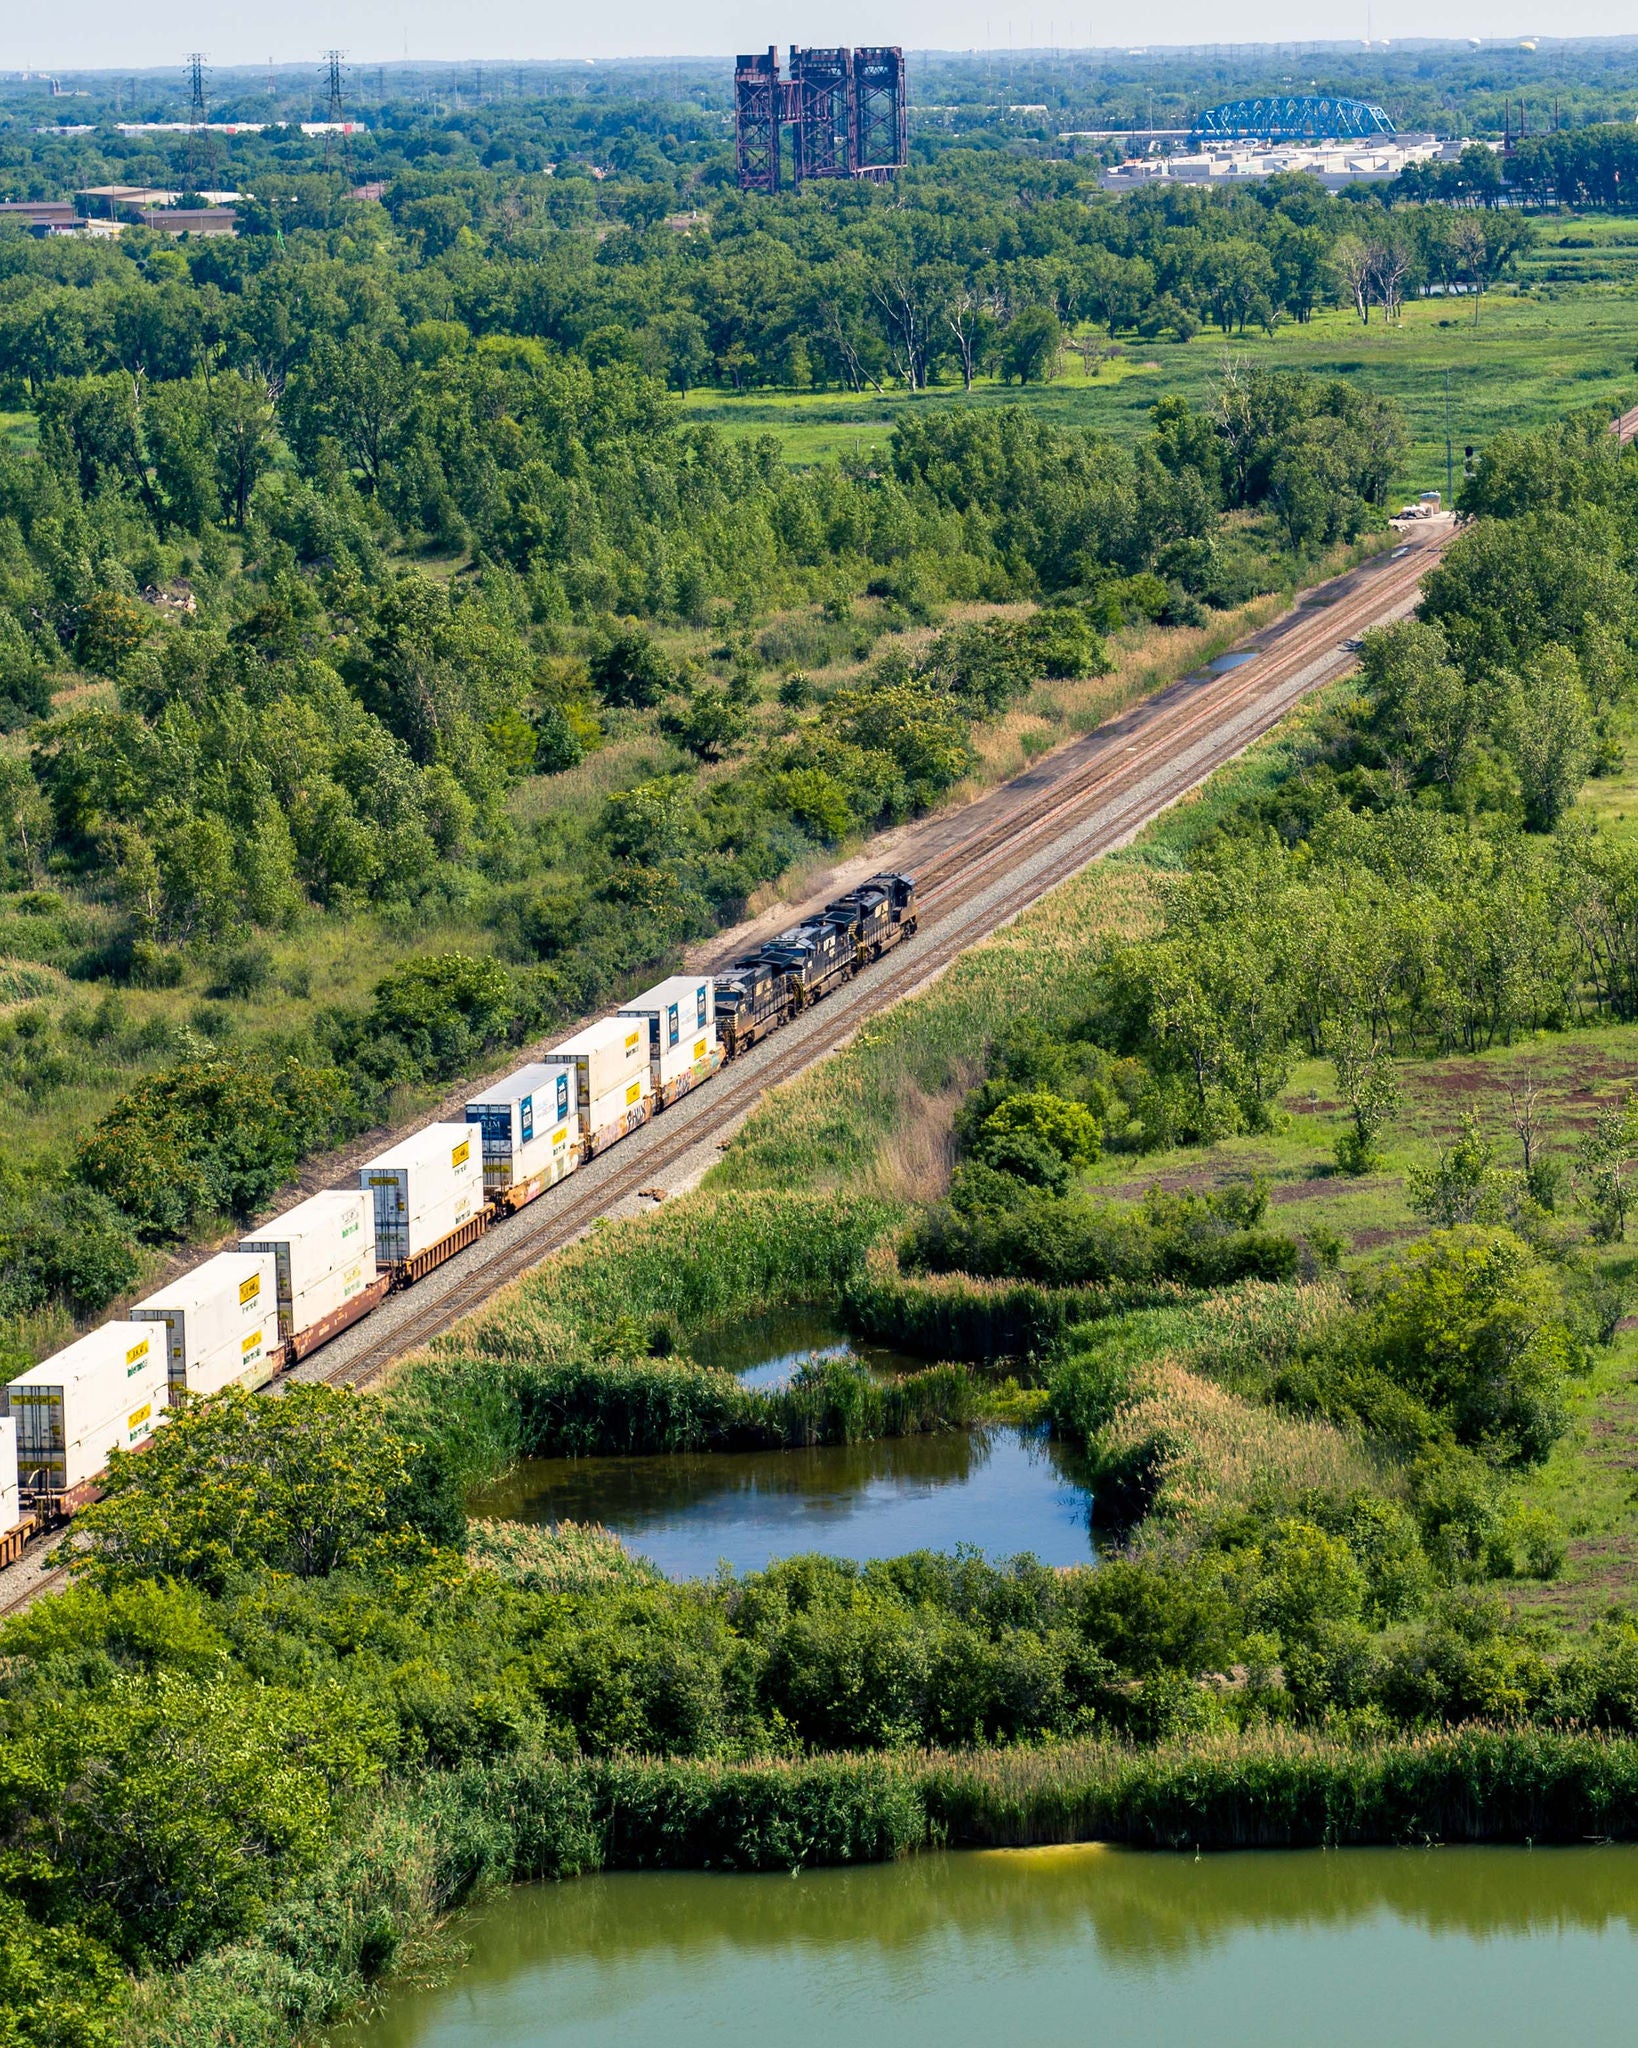 Aerial view of train passing through an industrial development wooded site